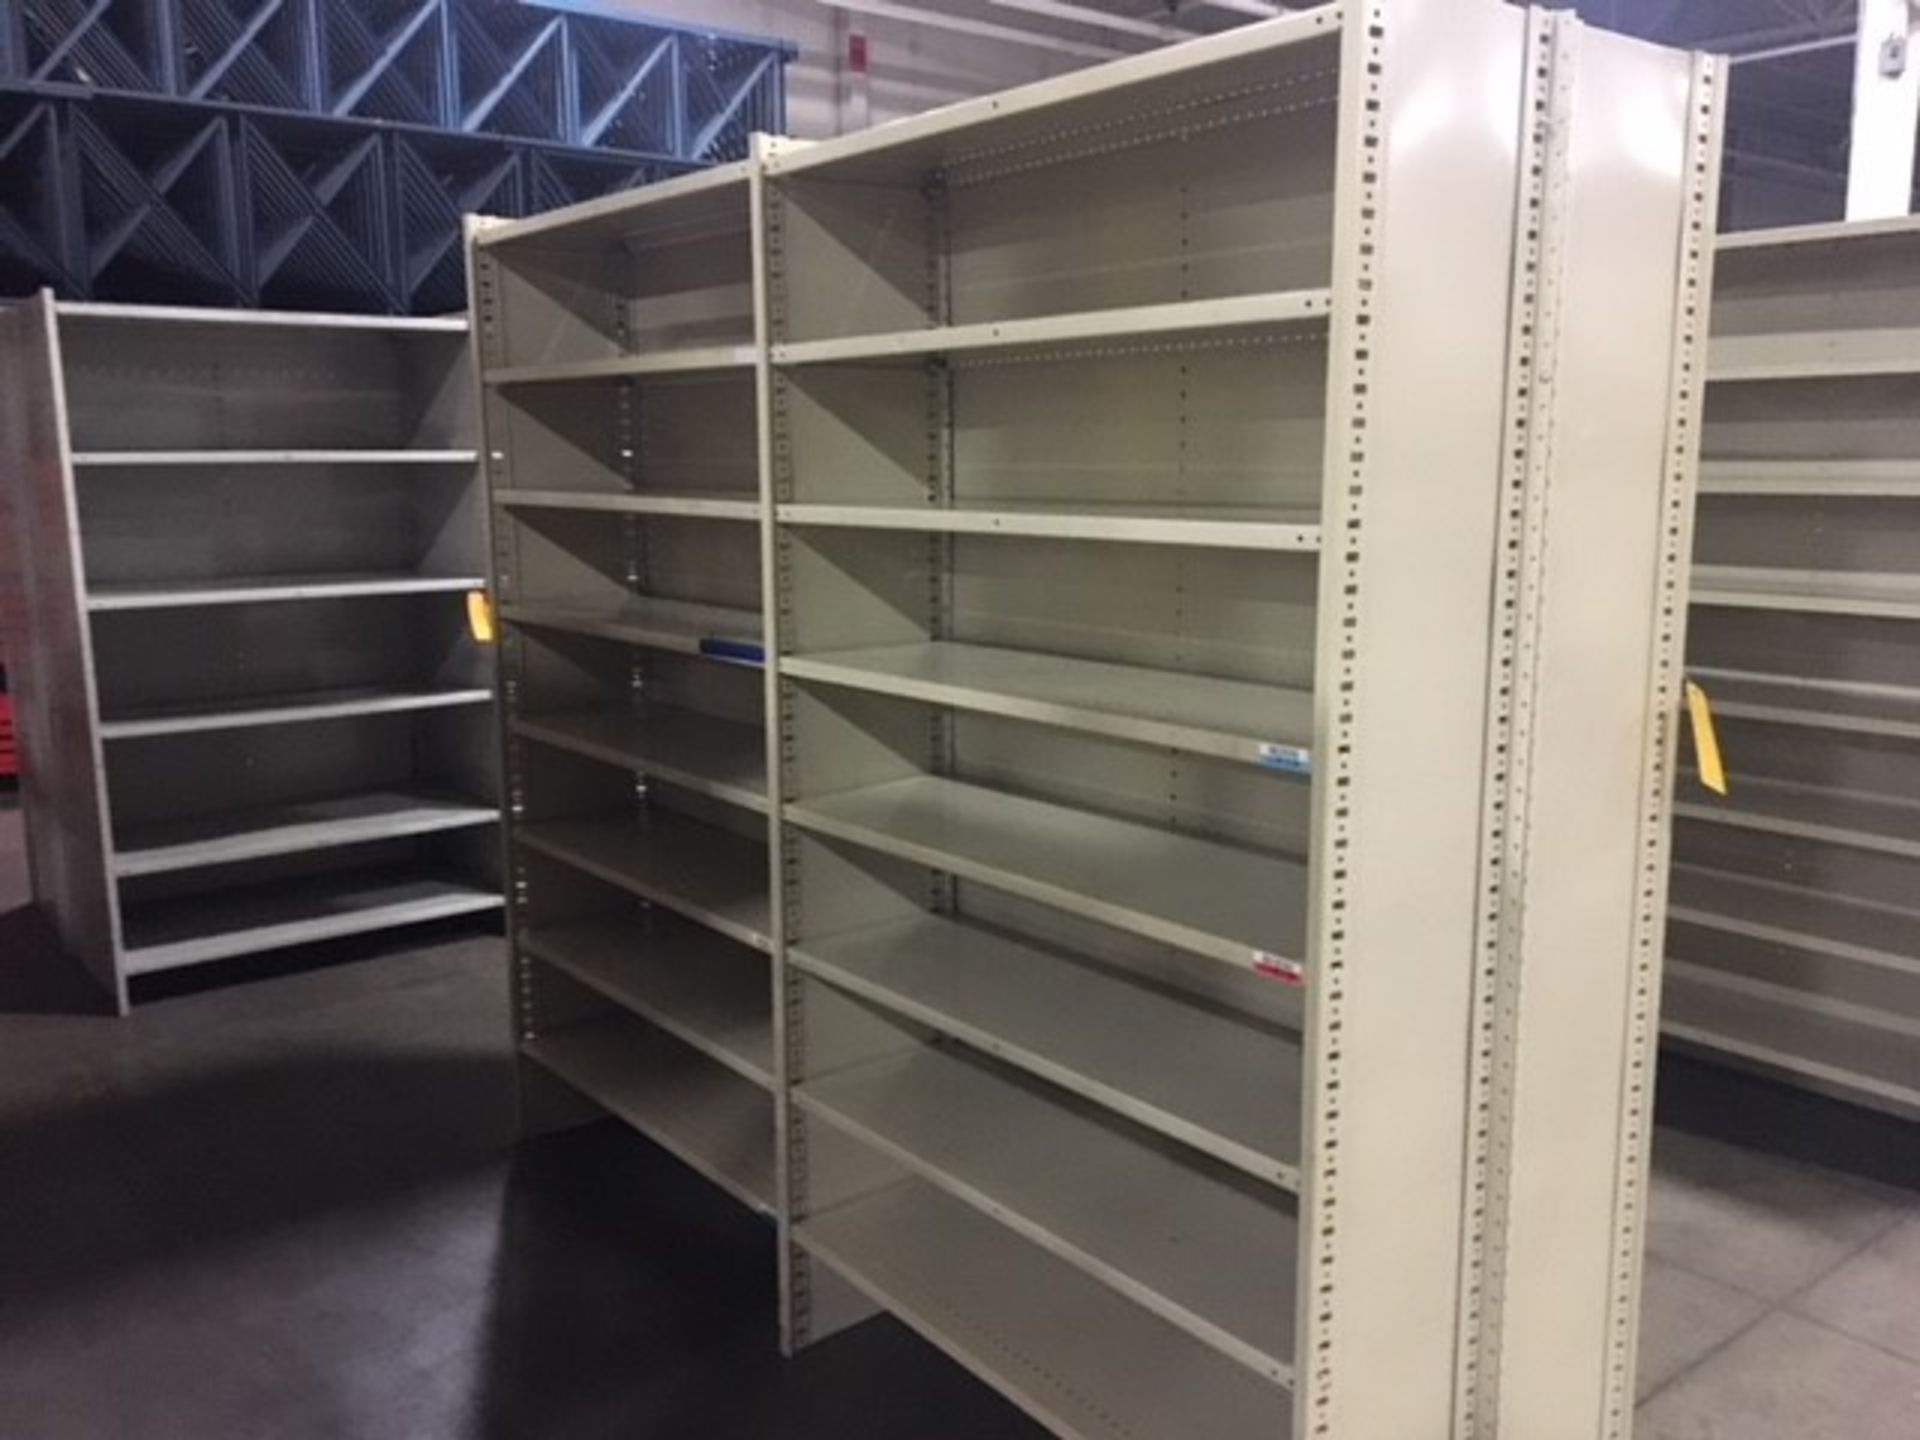 220 BAYS OF 15'' X 48* X 87'' WITH 8 SHELVES PER BAY - 48'' X 87'' BOROUGHS BACK PANEL - Image 3 of 5